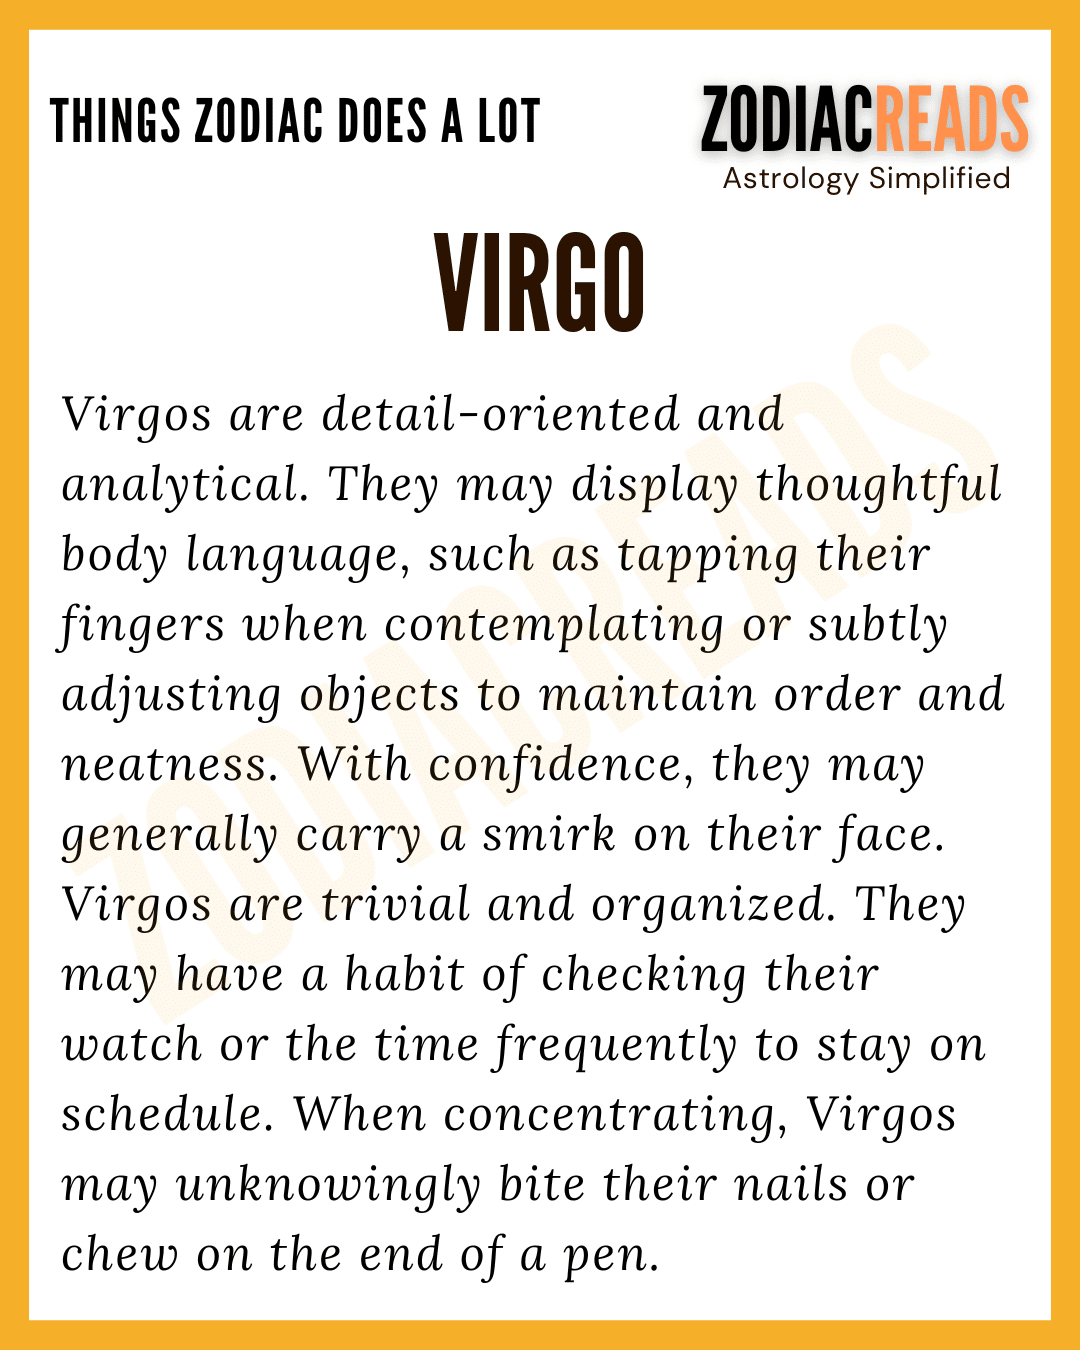 Virgo Things That Zodiac Signs Tend To Do A Lot